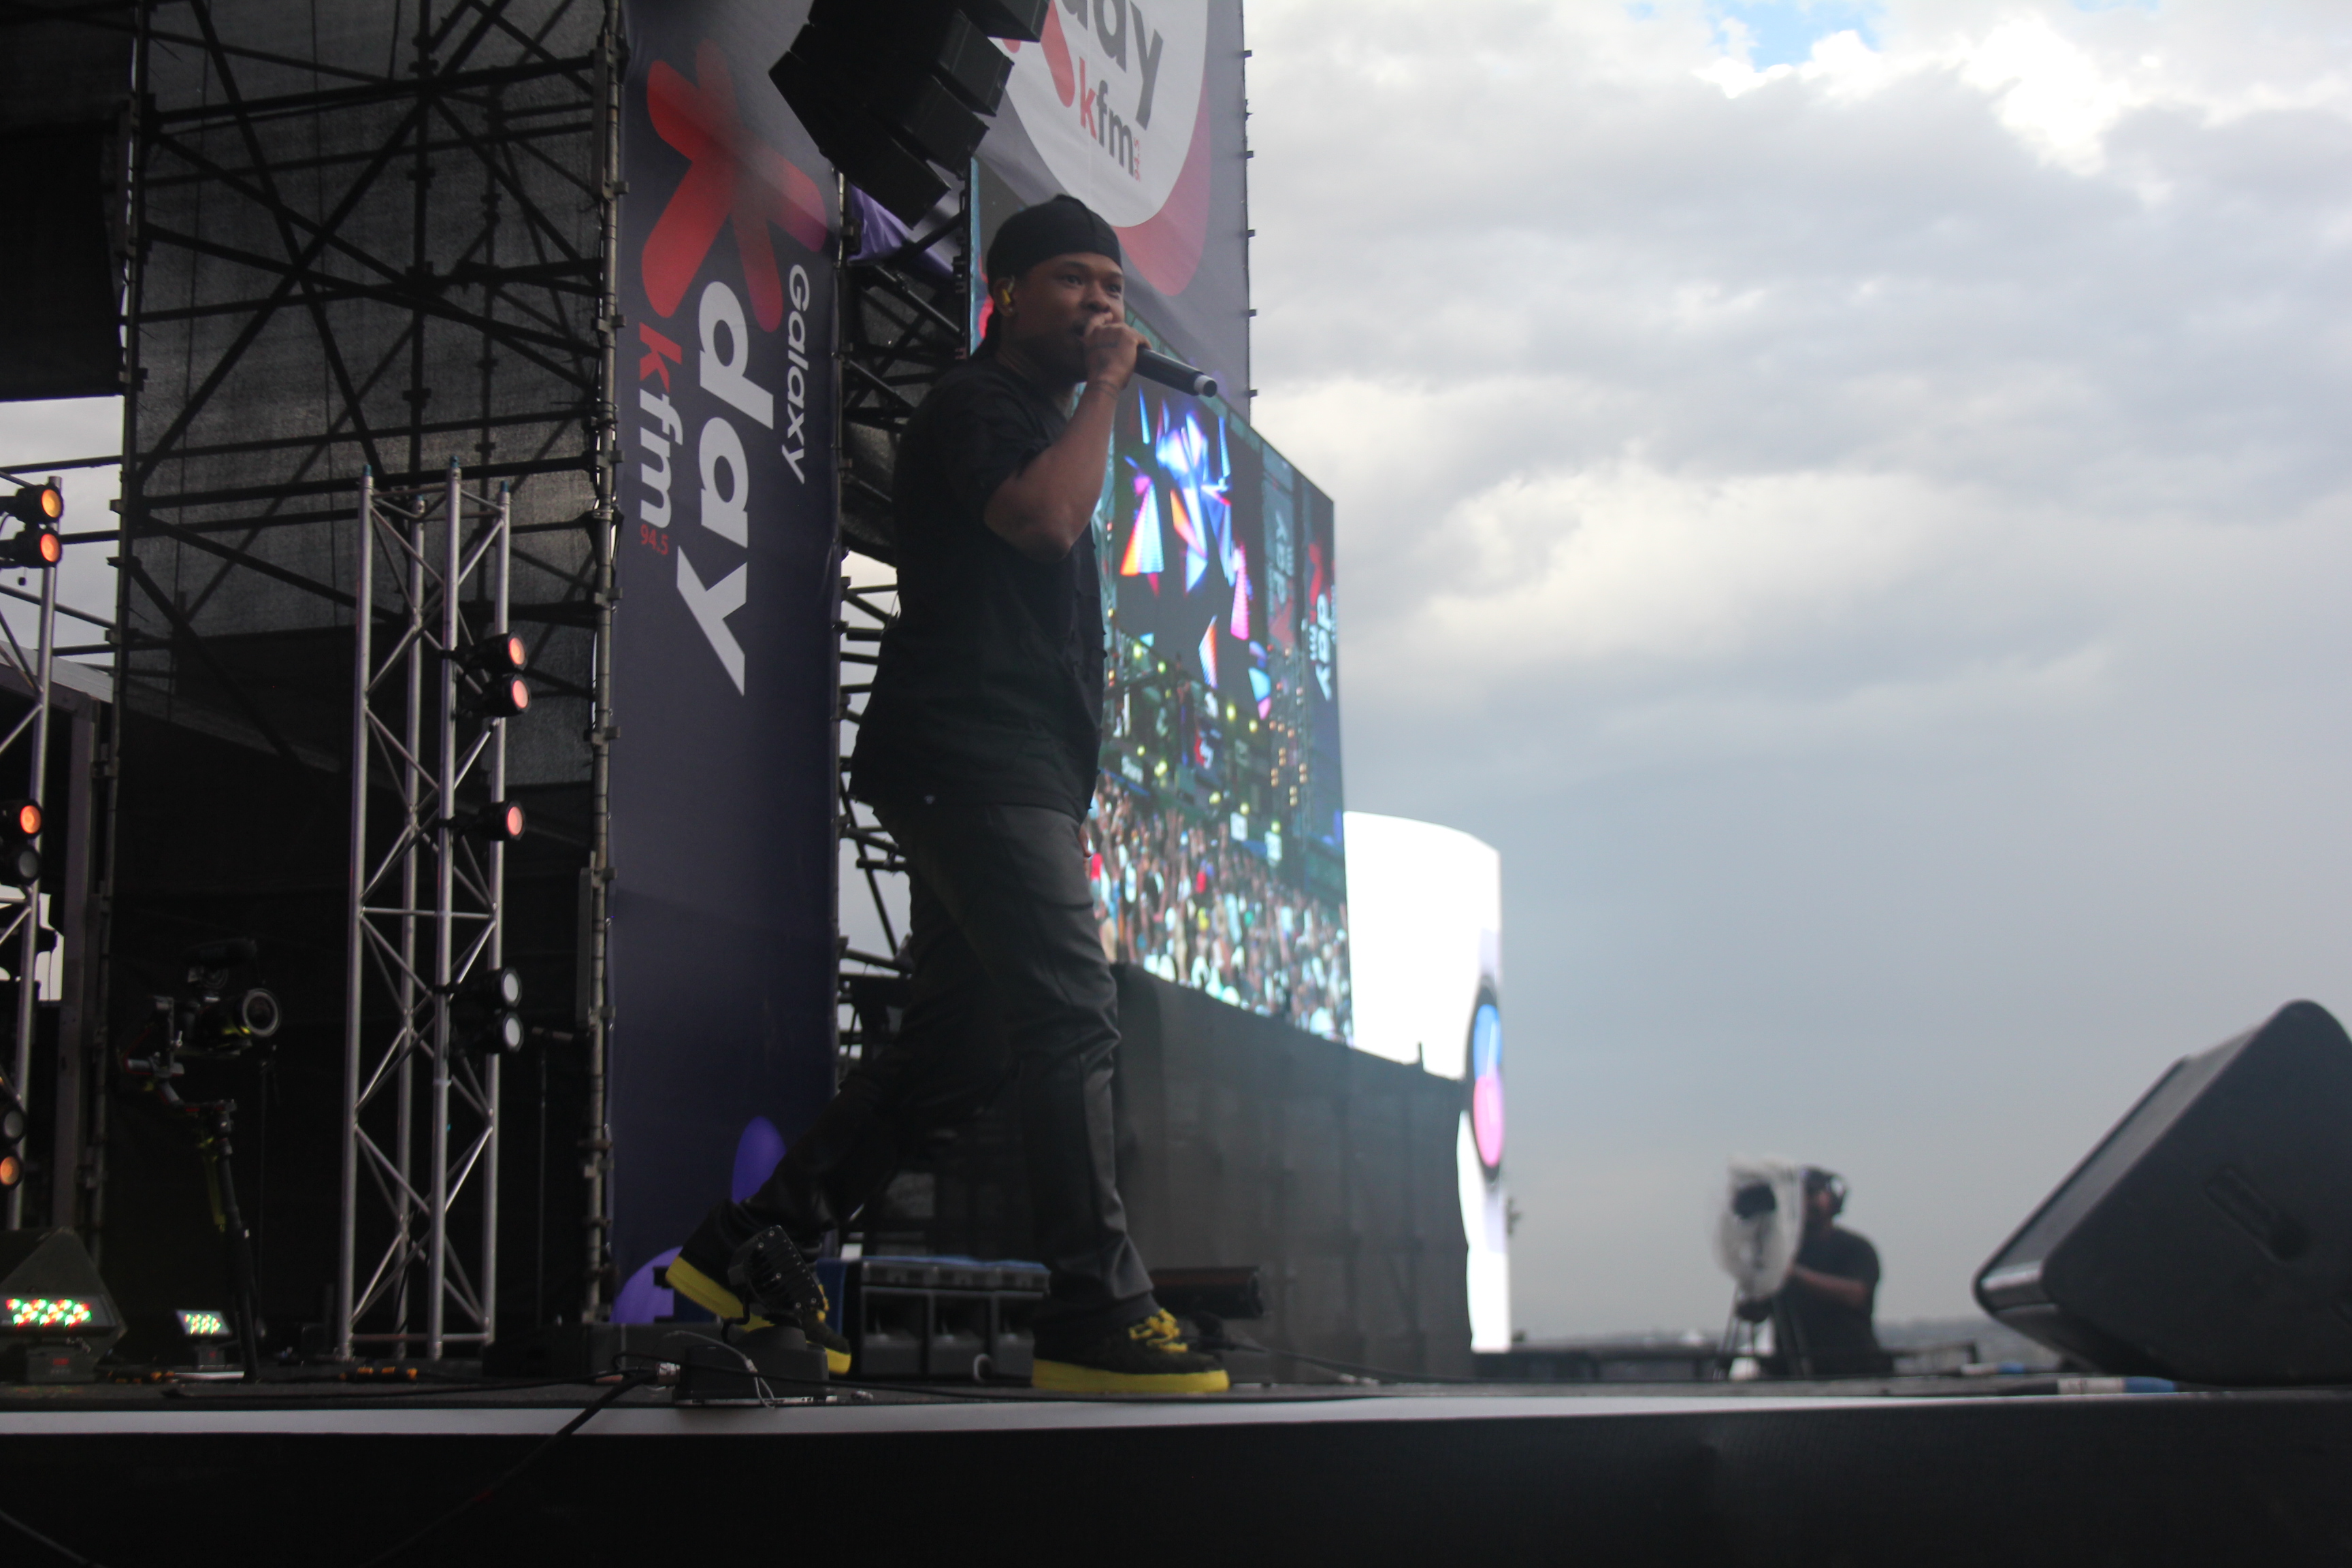 Nasty C comes to the stage amid the screams of the crowd at the Galaxy KDay Festival. Image: Oren-Andrew Wentzel